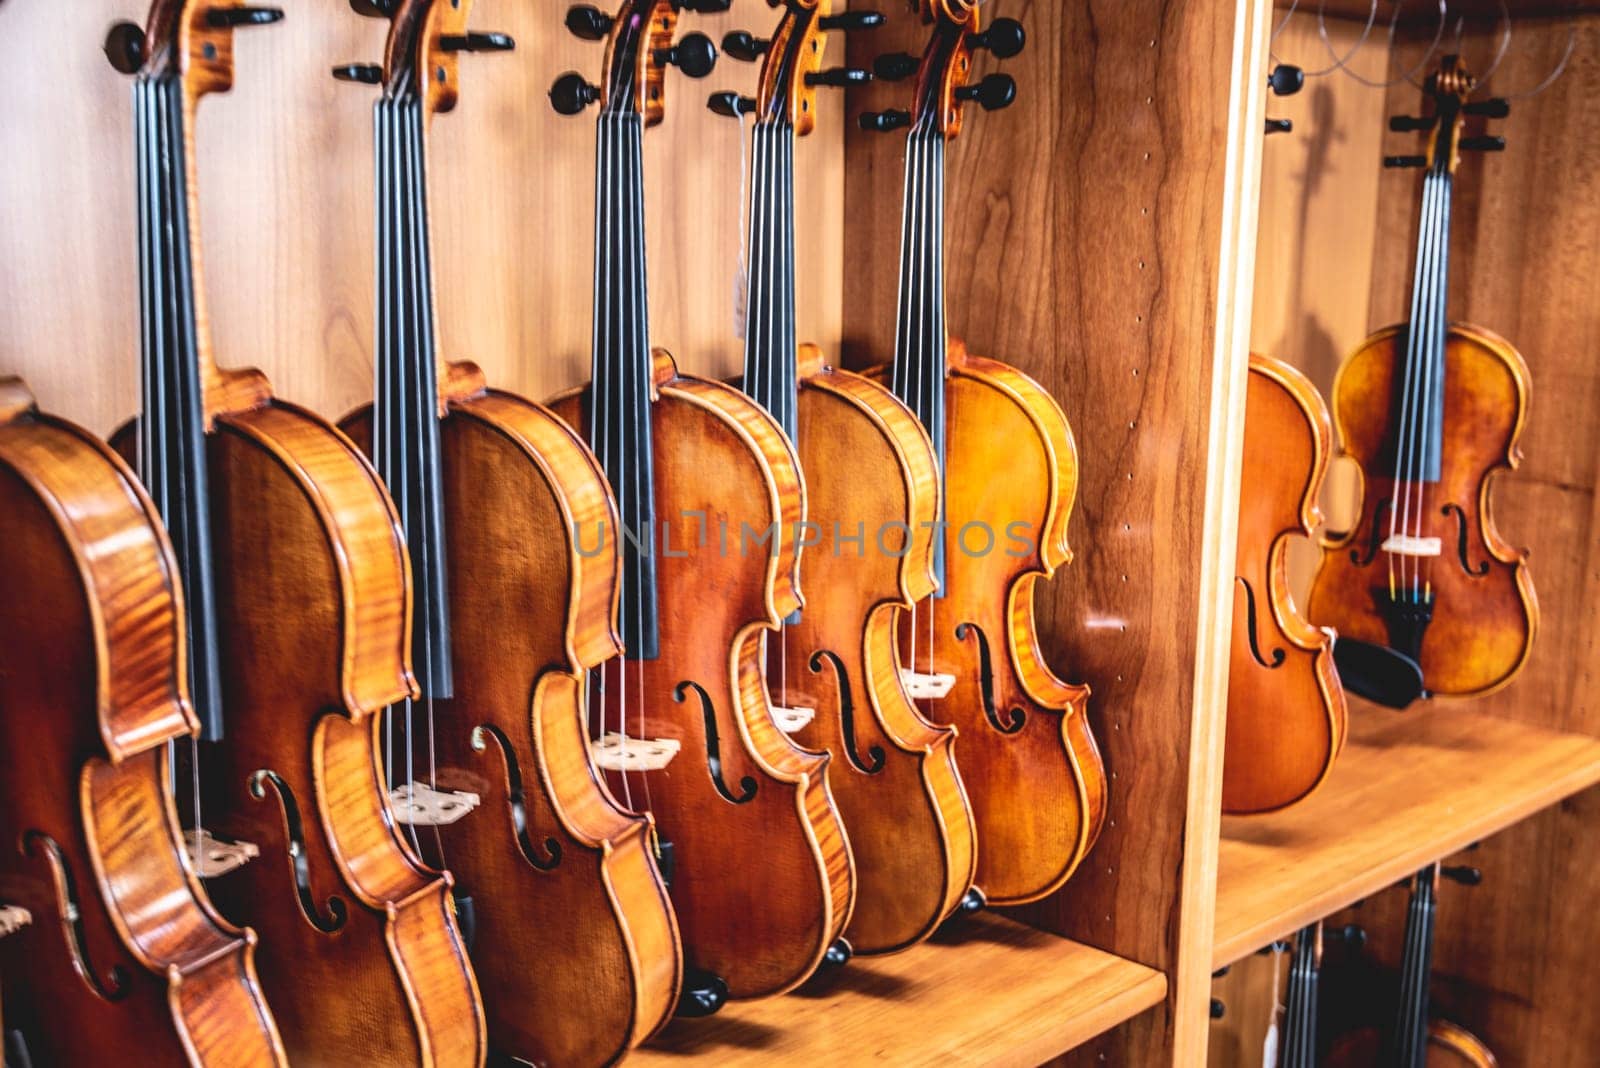 Violins are lined on shelve in musical instruments store by iansaf